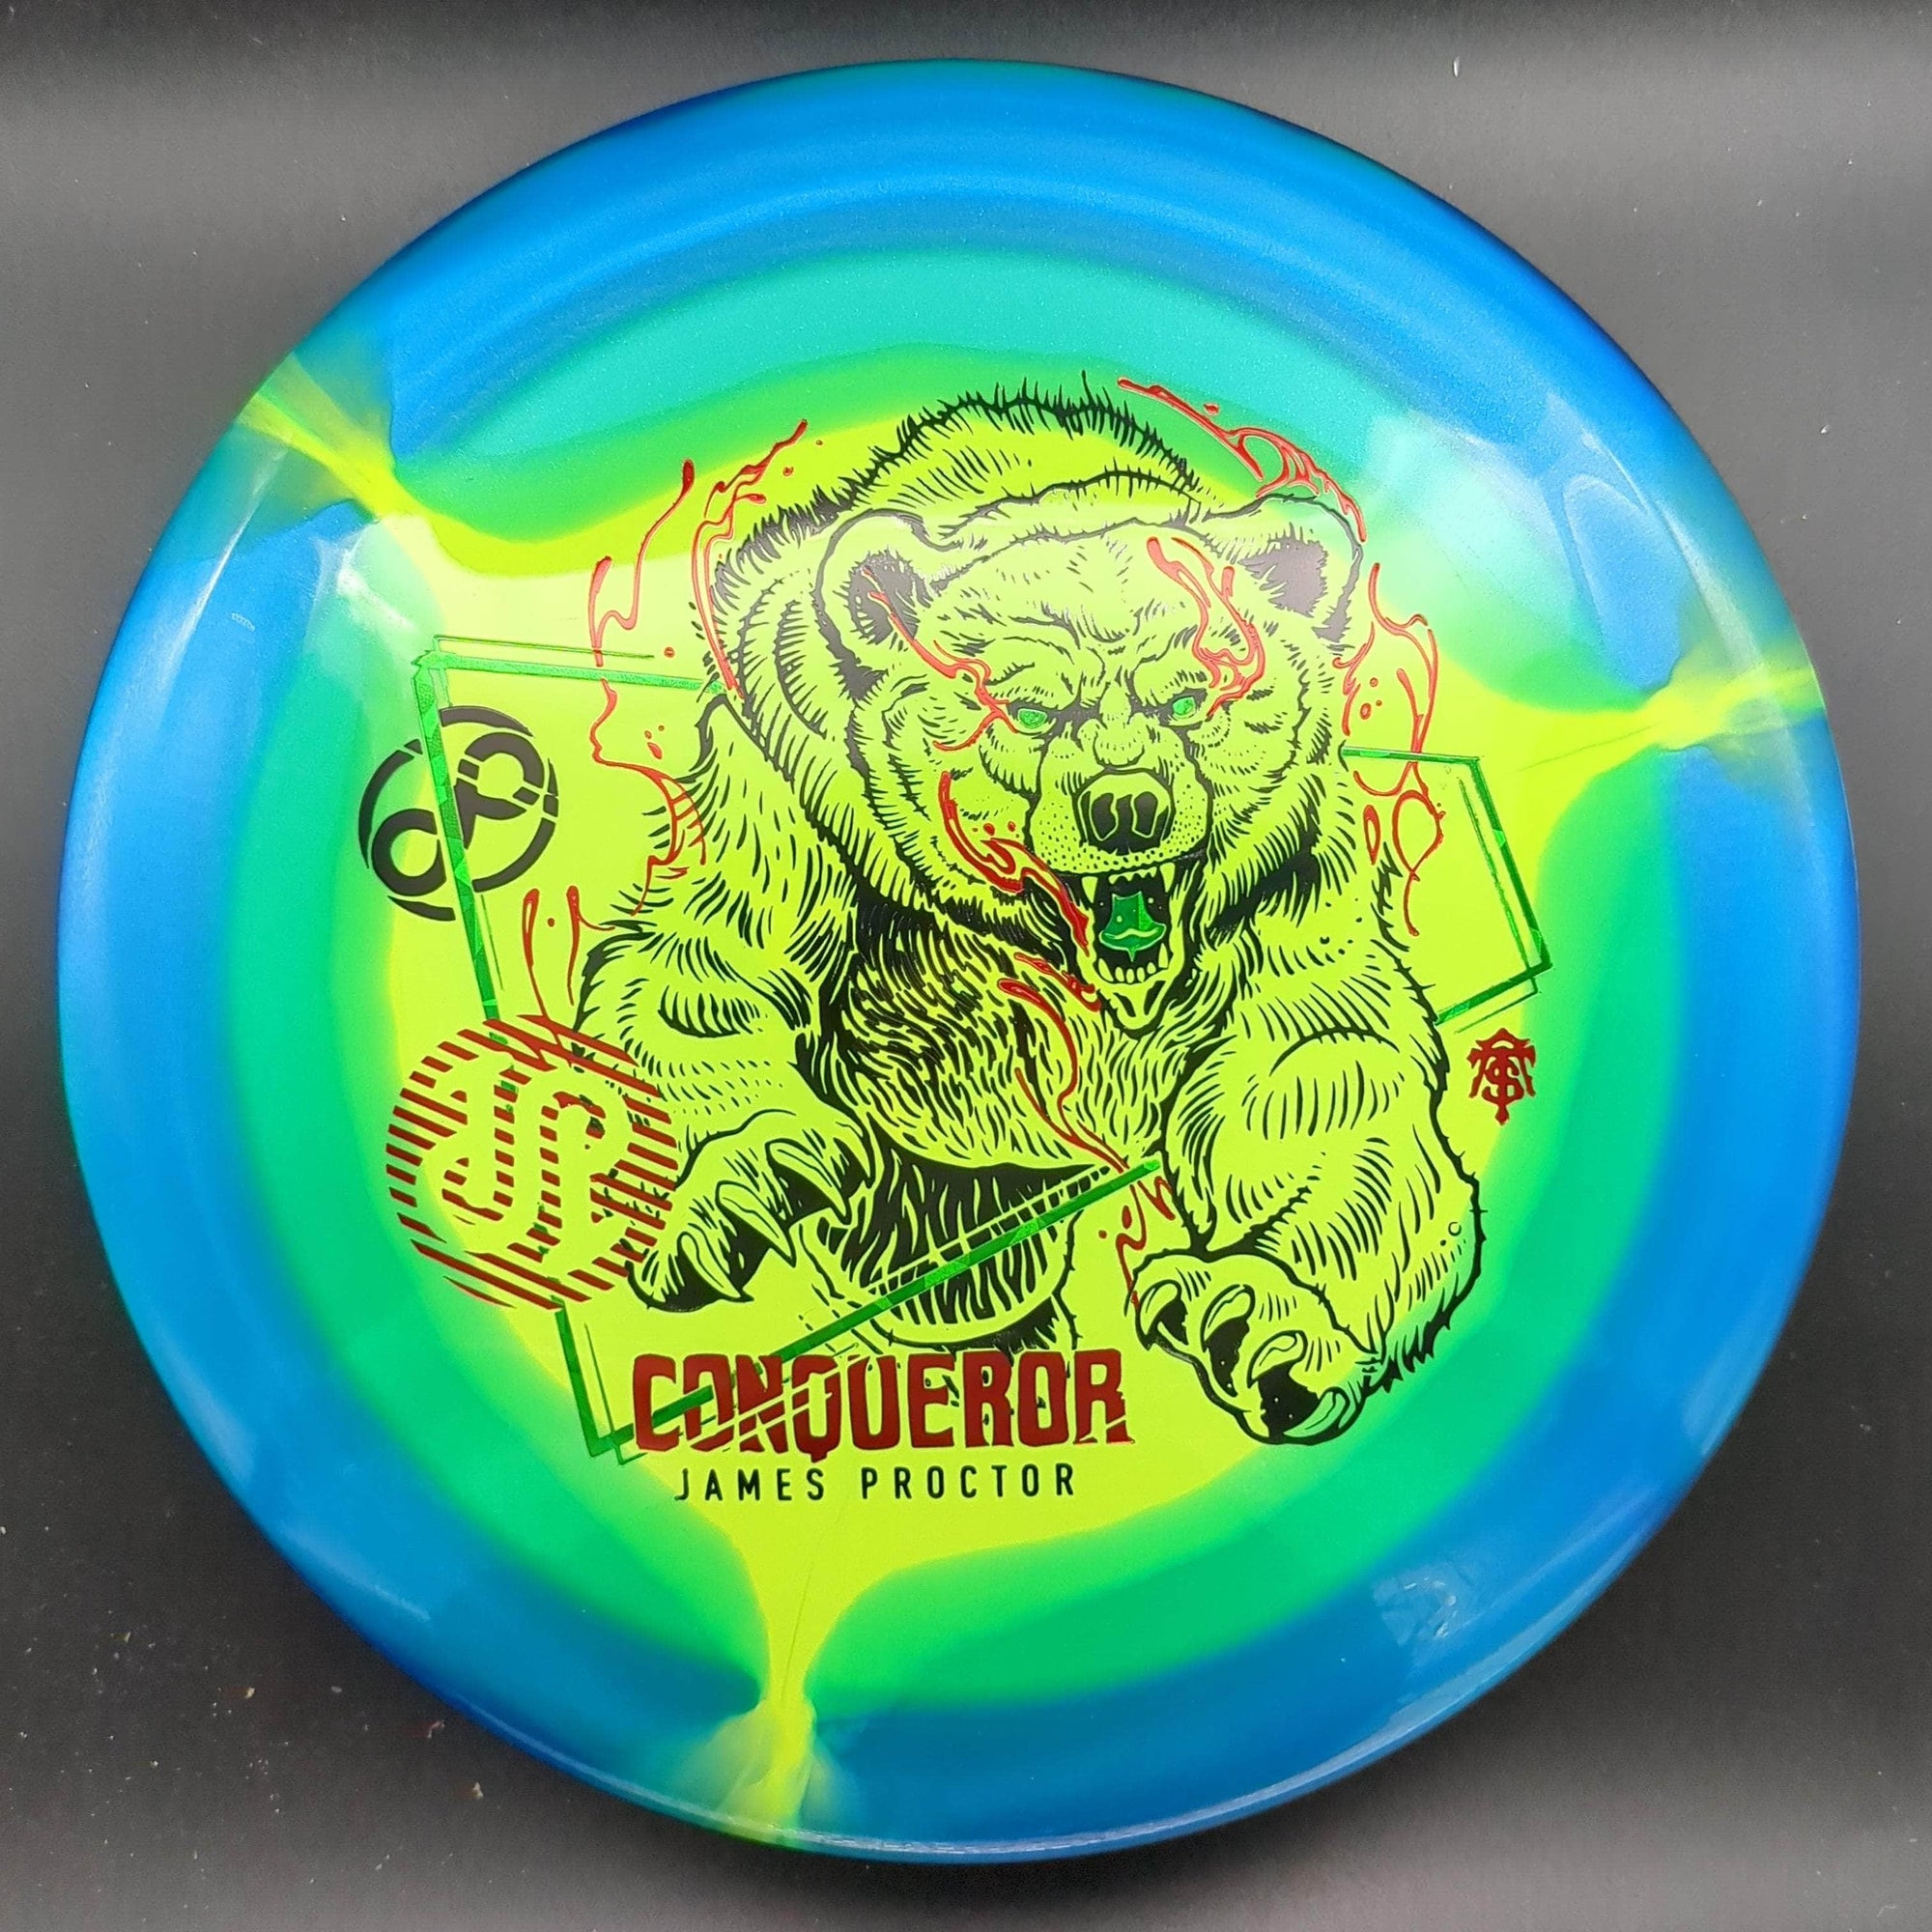 Infinite Discs Distance Driver Blue/Yellow Green/Red Stamp 175g Conqueror, Halo S-Blend, James Proctor Signature Edition